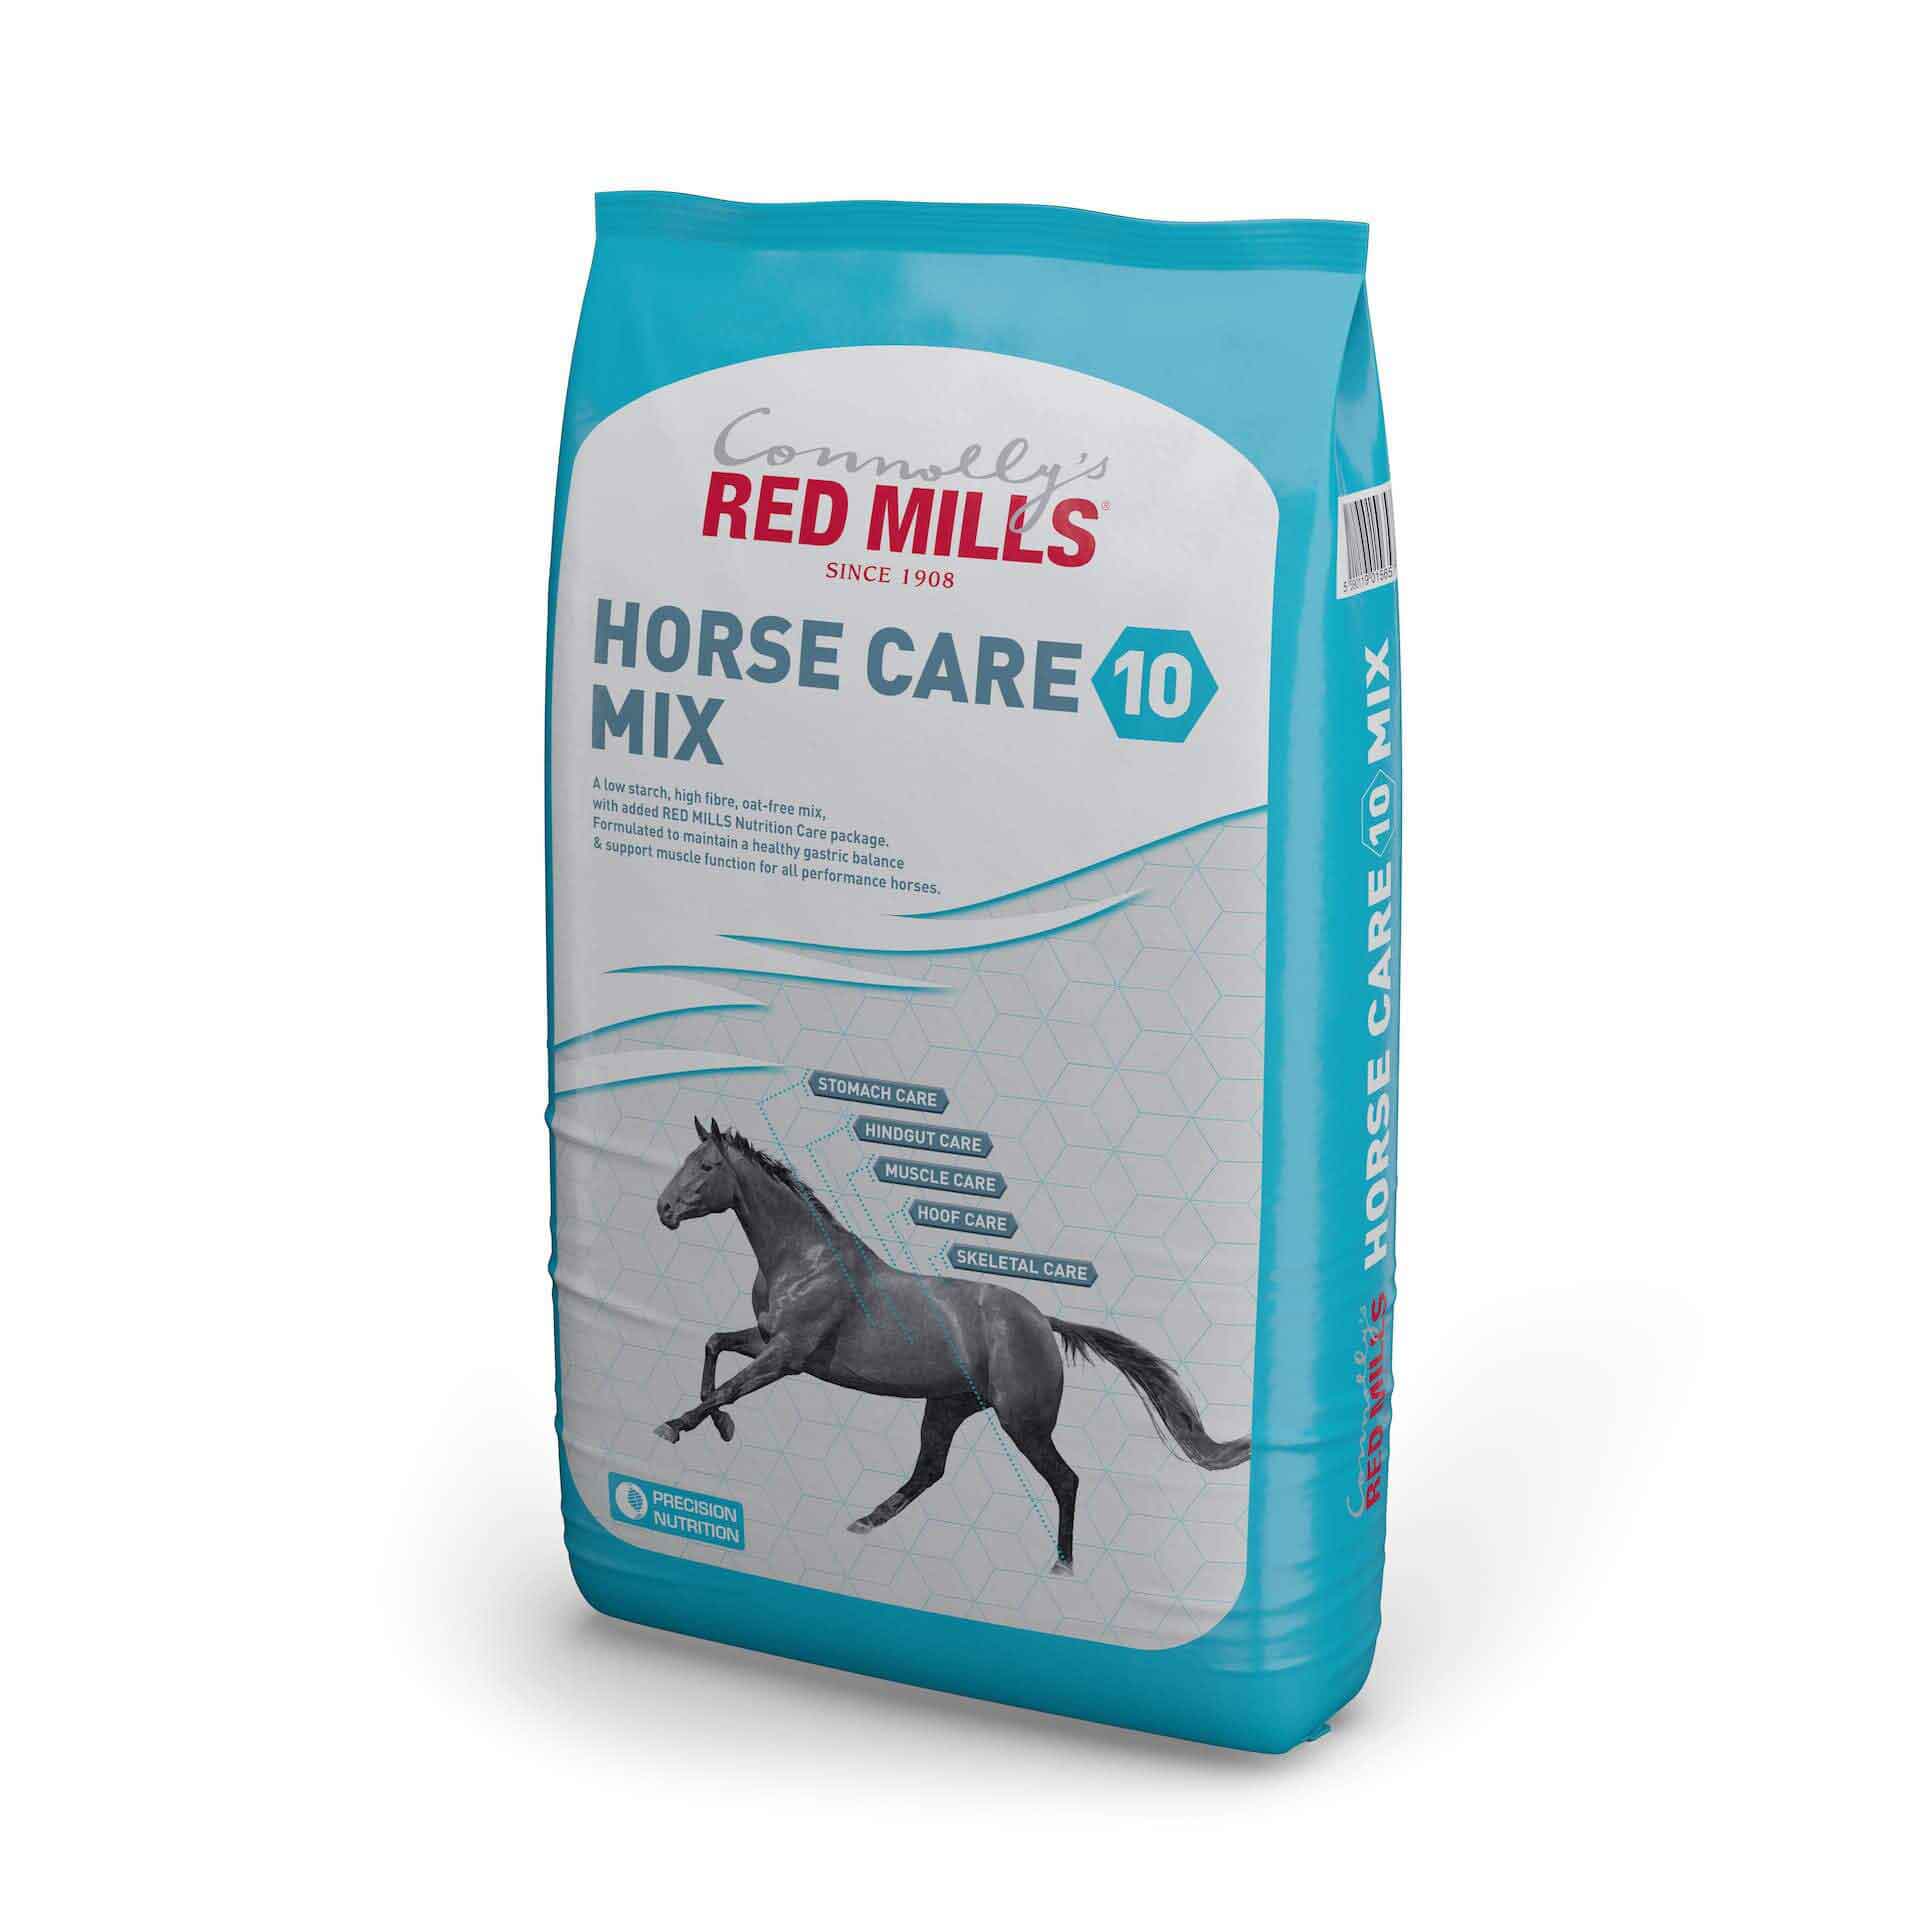 Horse Care 10 Mix